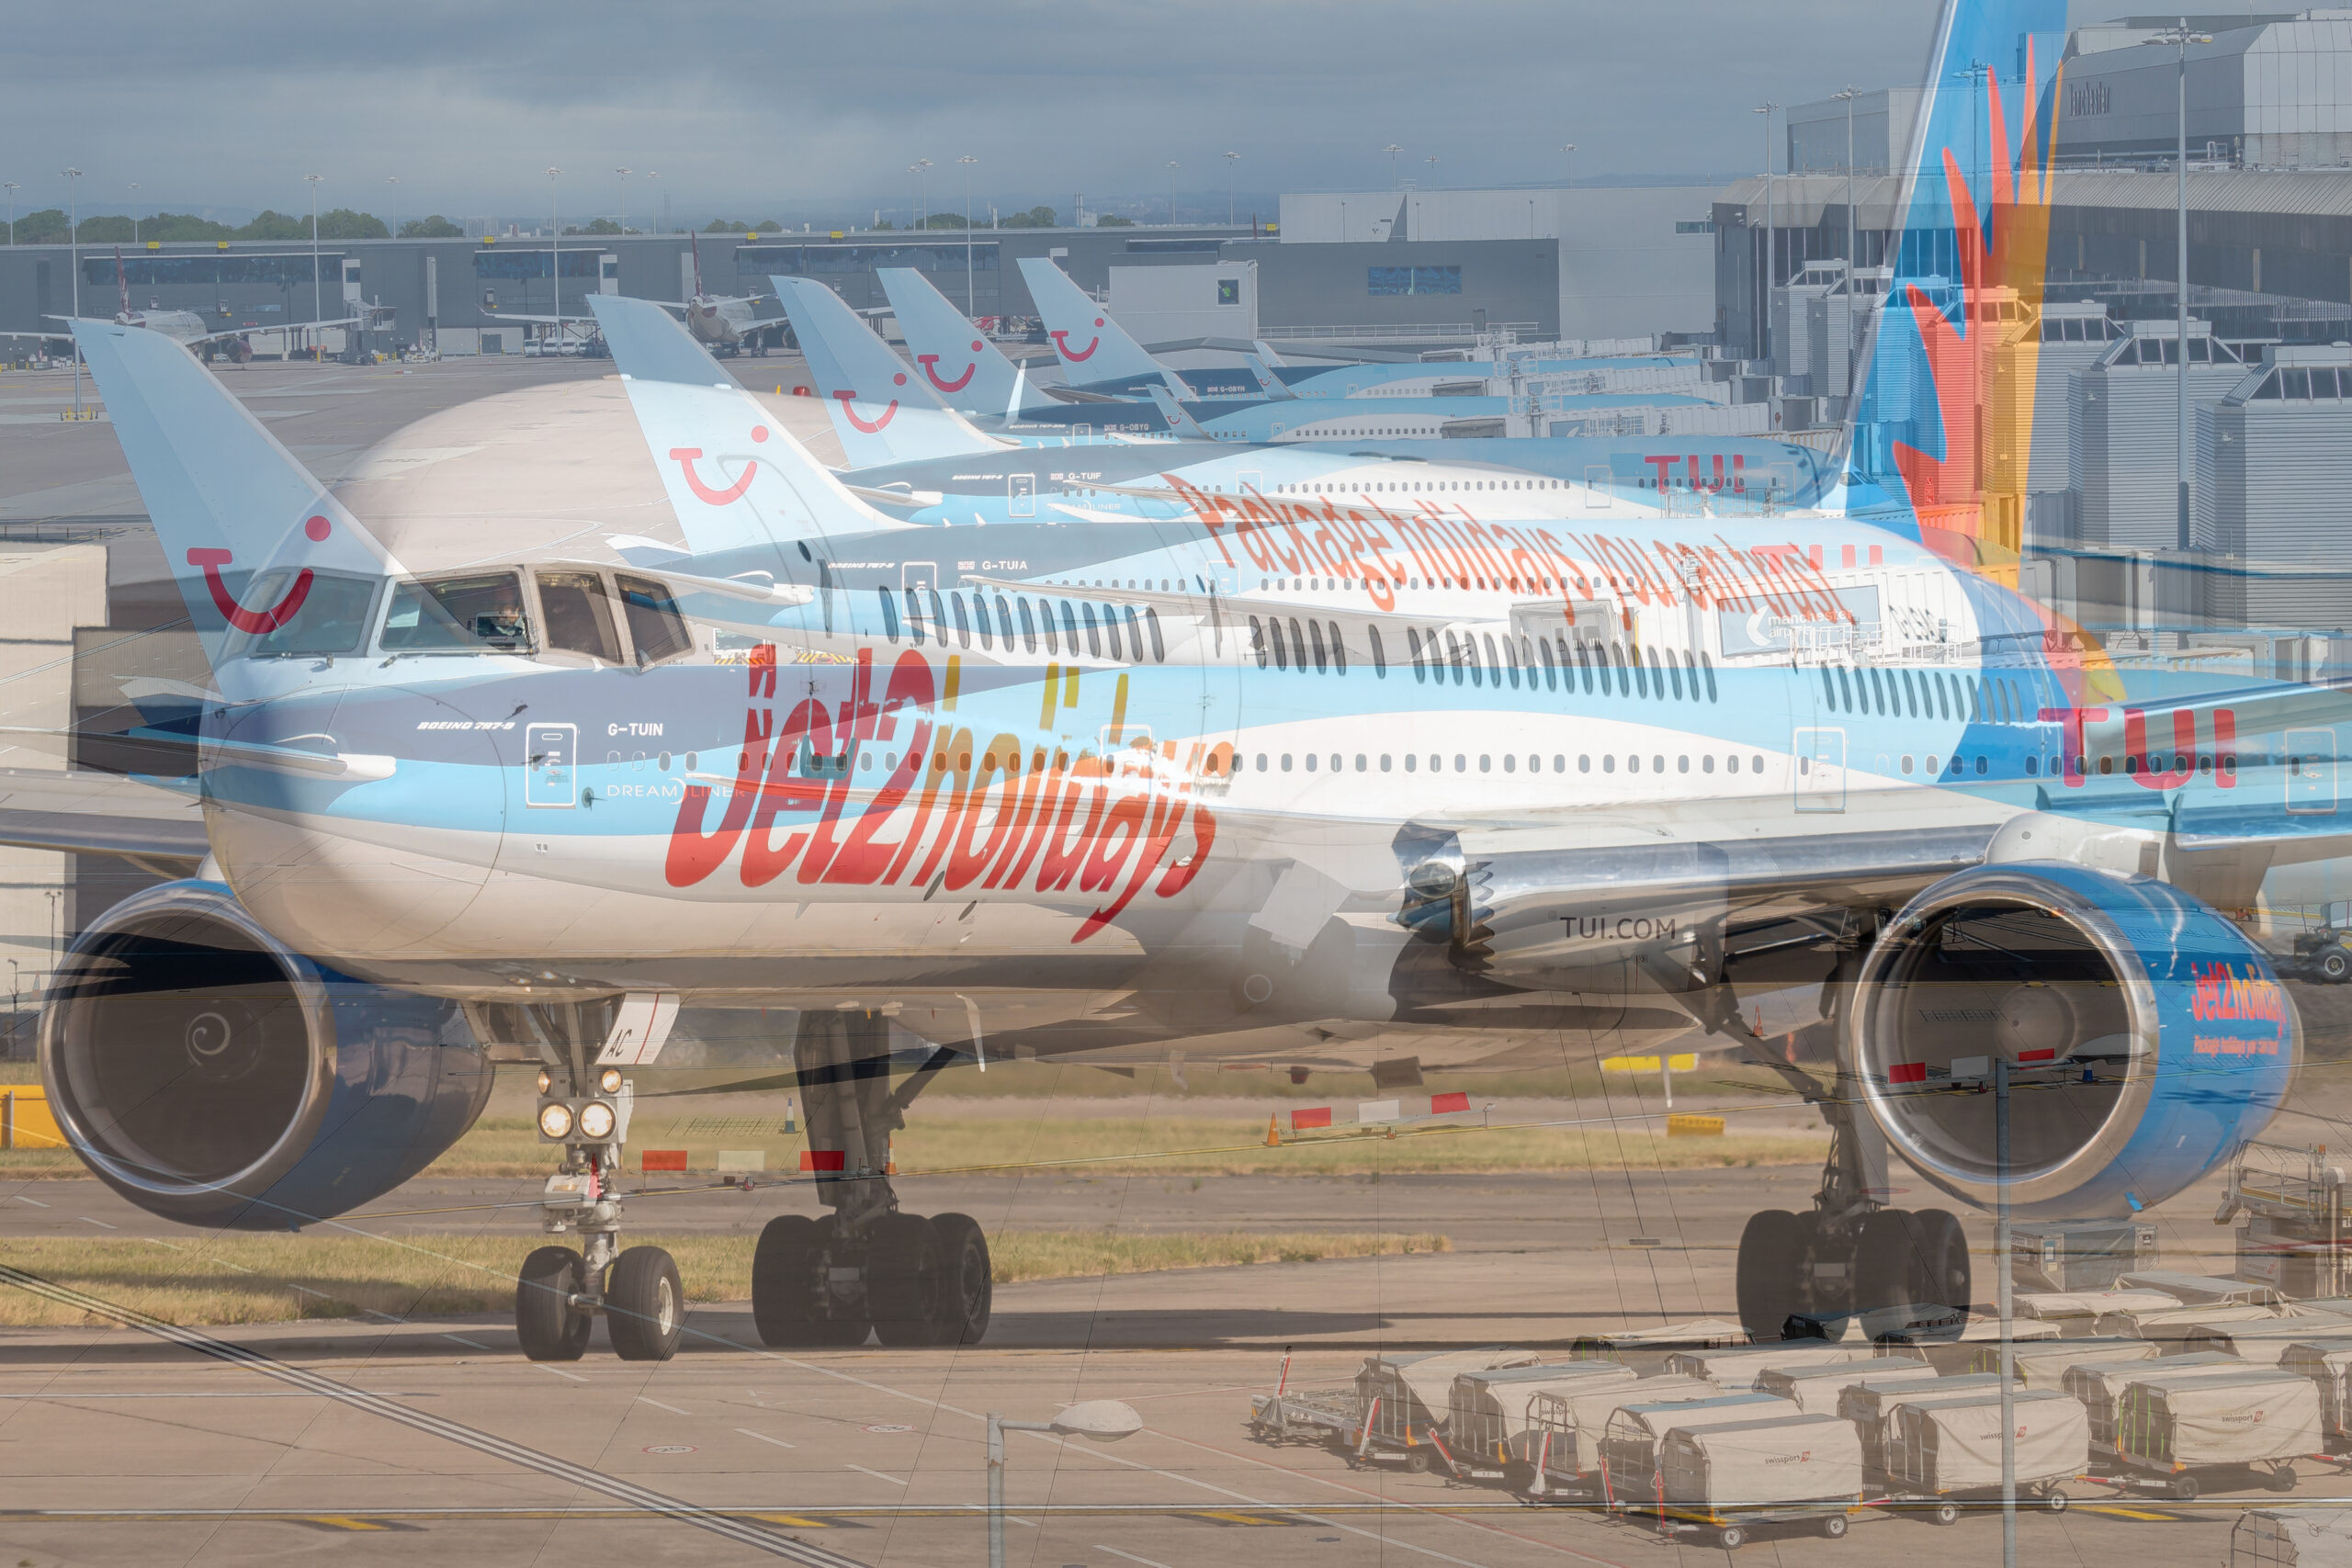 TUI vs. Jet2: Who Is Operating More Flights in the UK?